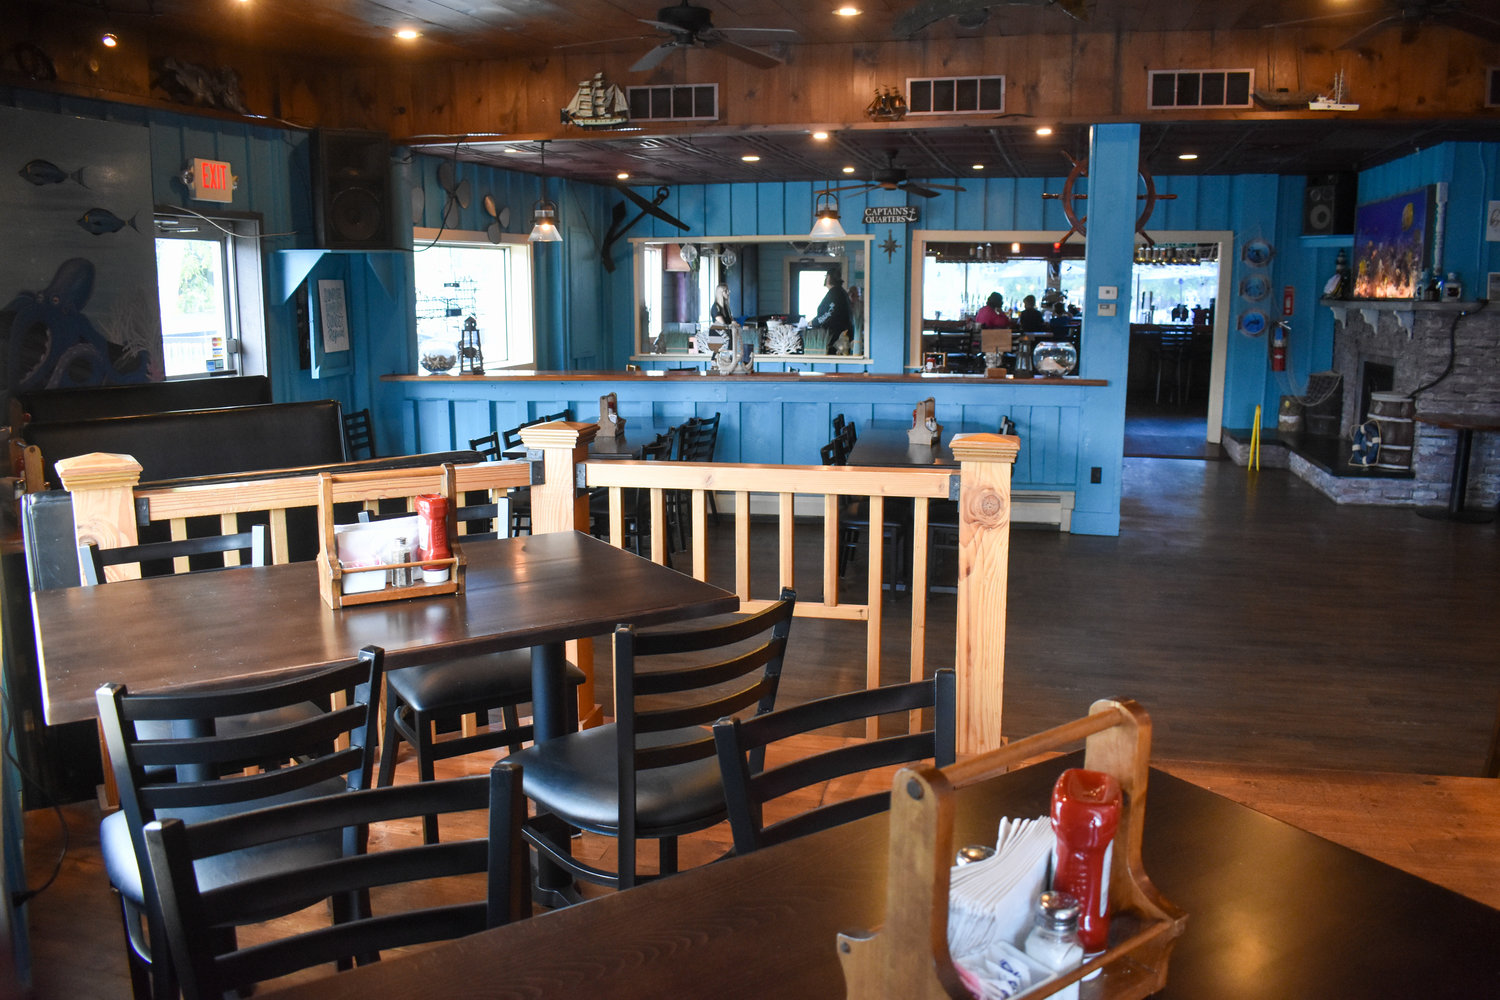 The interior of the Crazy Clam has been refreshed with new paint and beach-themed decor.